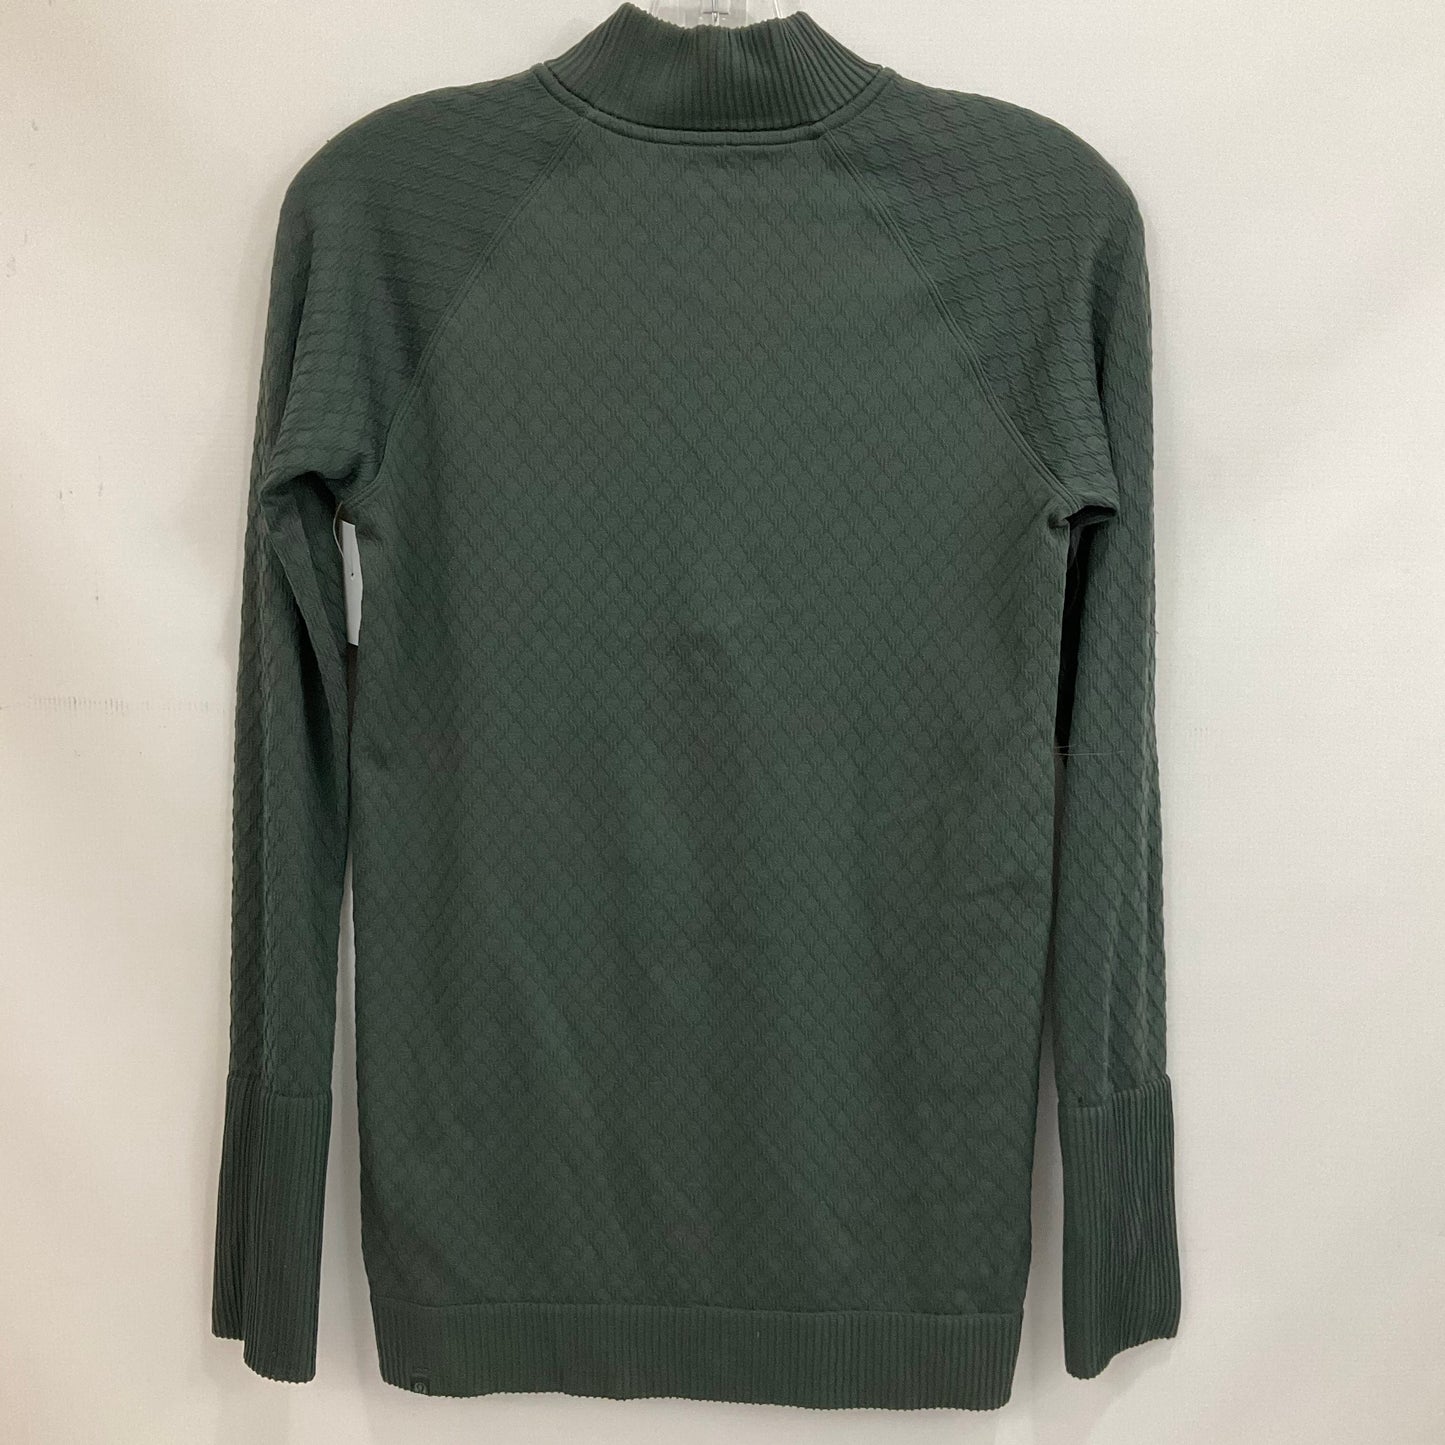 Athletic Top Long Sleeve Collar By Lululemon  Size: 8